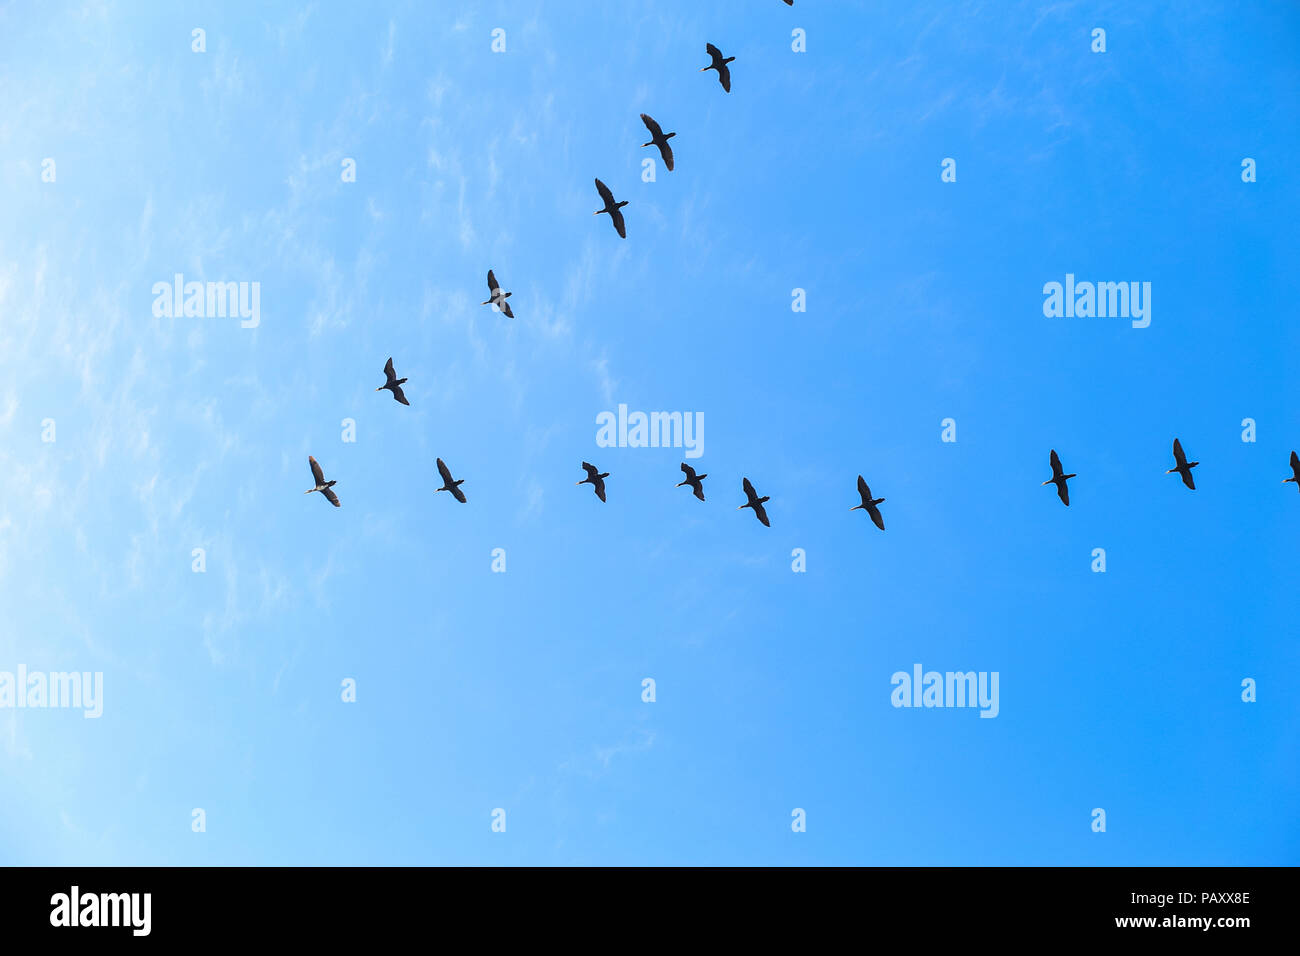 Flying Birds In The Shape Of An Arrow In The Sky Bird Migration Stock Photo Alamy